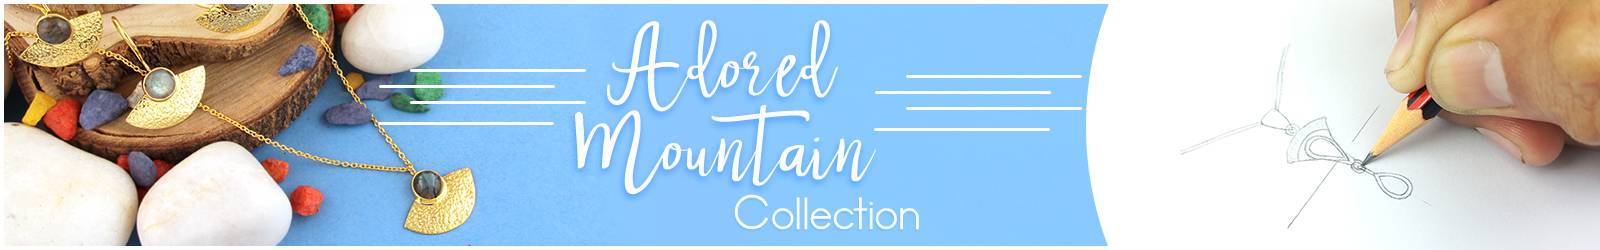 Online Wholesale Adored Mountain Jewelry Collection